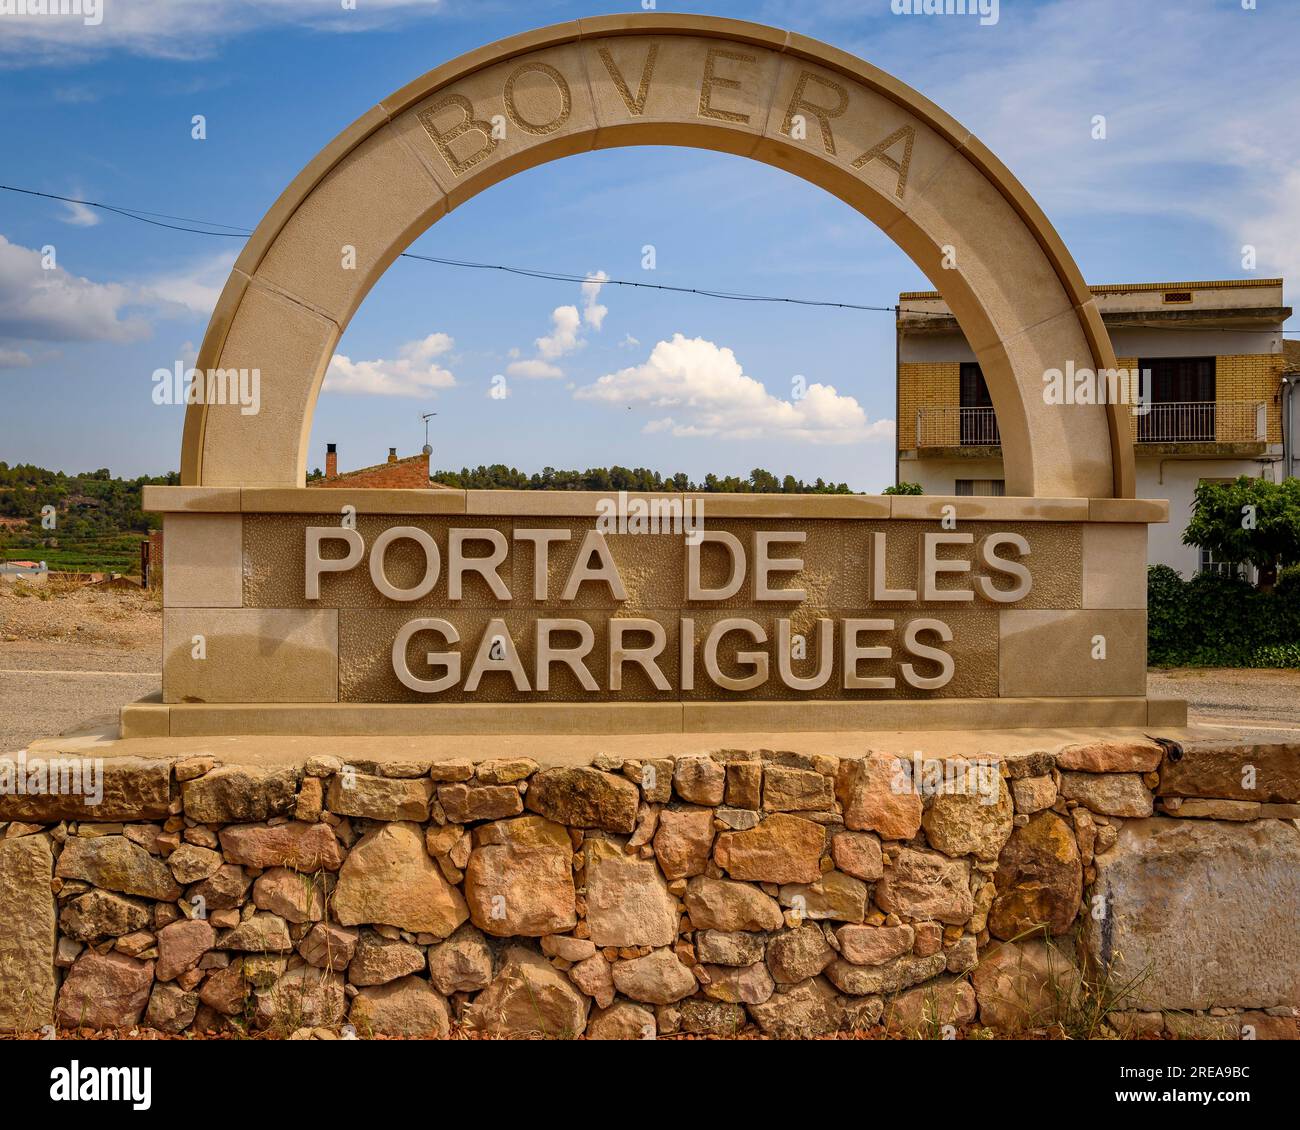 Welcome arch at the entrance to the town of Bovera, at the beginning of Les Garrigues region (Lleida, Catalonia, Spain) ESP: Arco de bienvenida Bovera Stock Photo